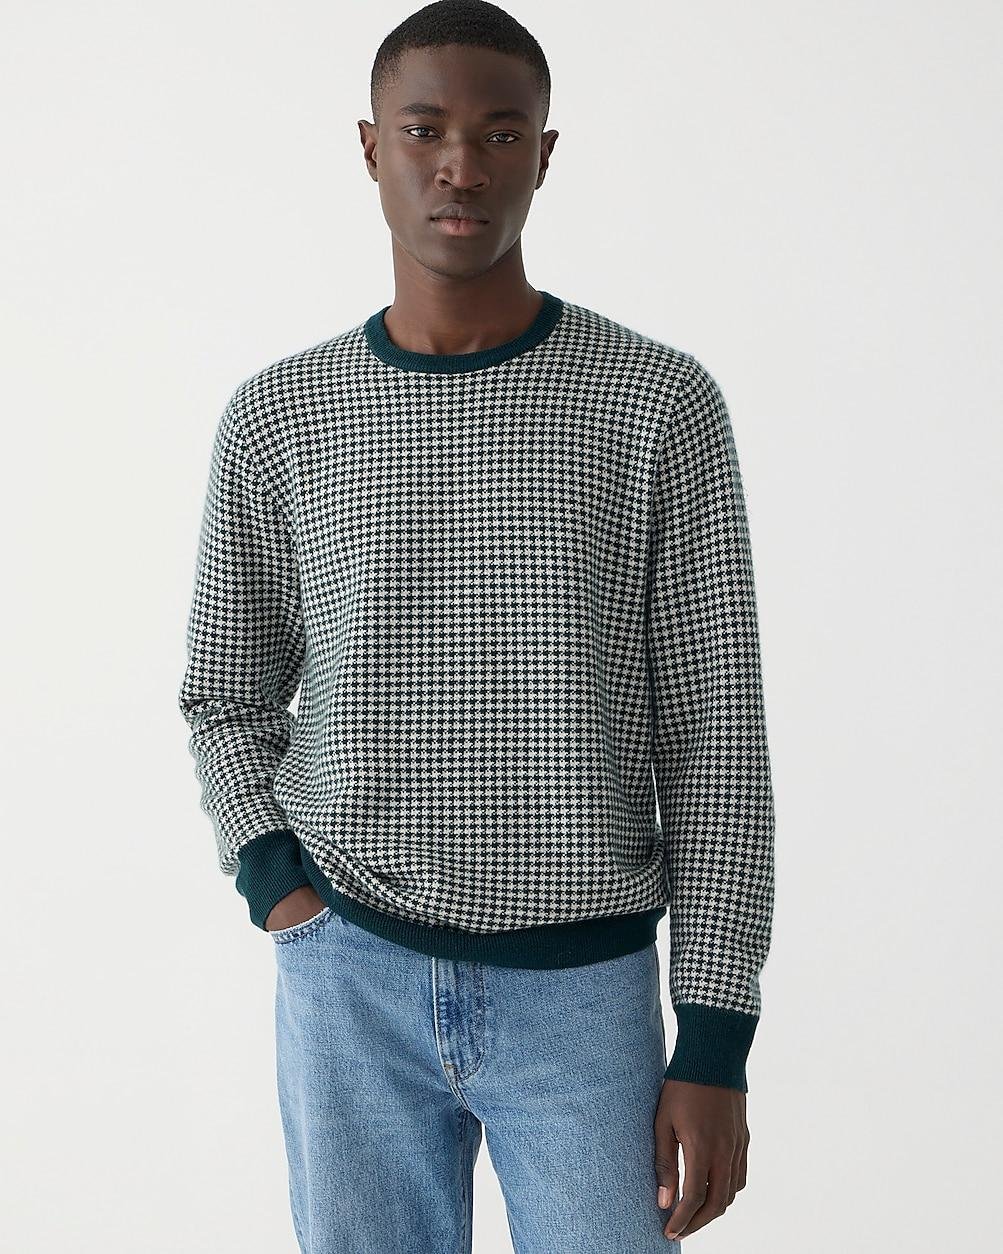 Cashmere crewneck sweater in houndstooth by J.CREW